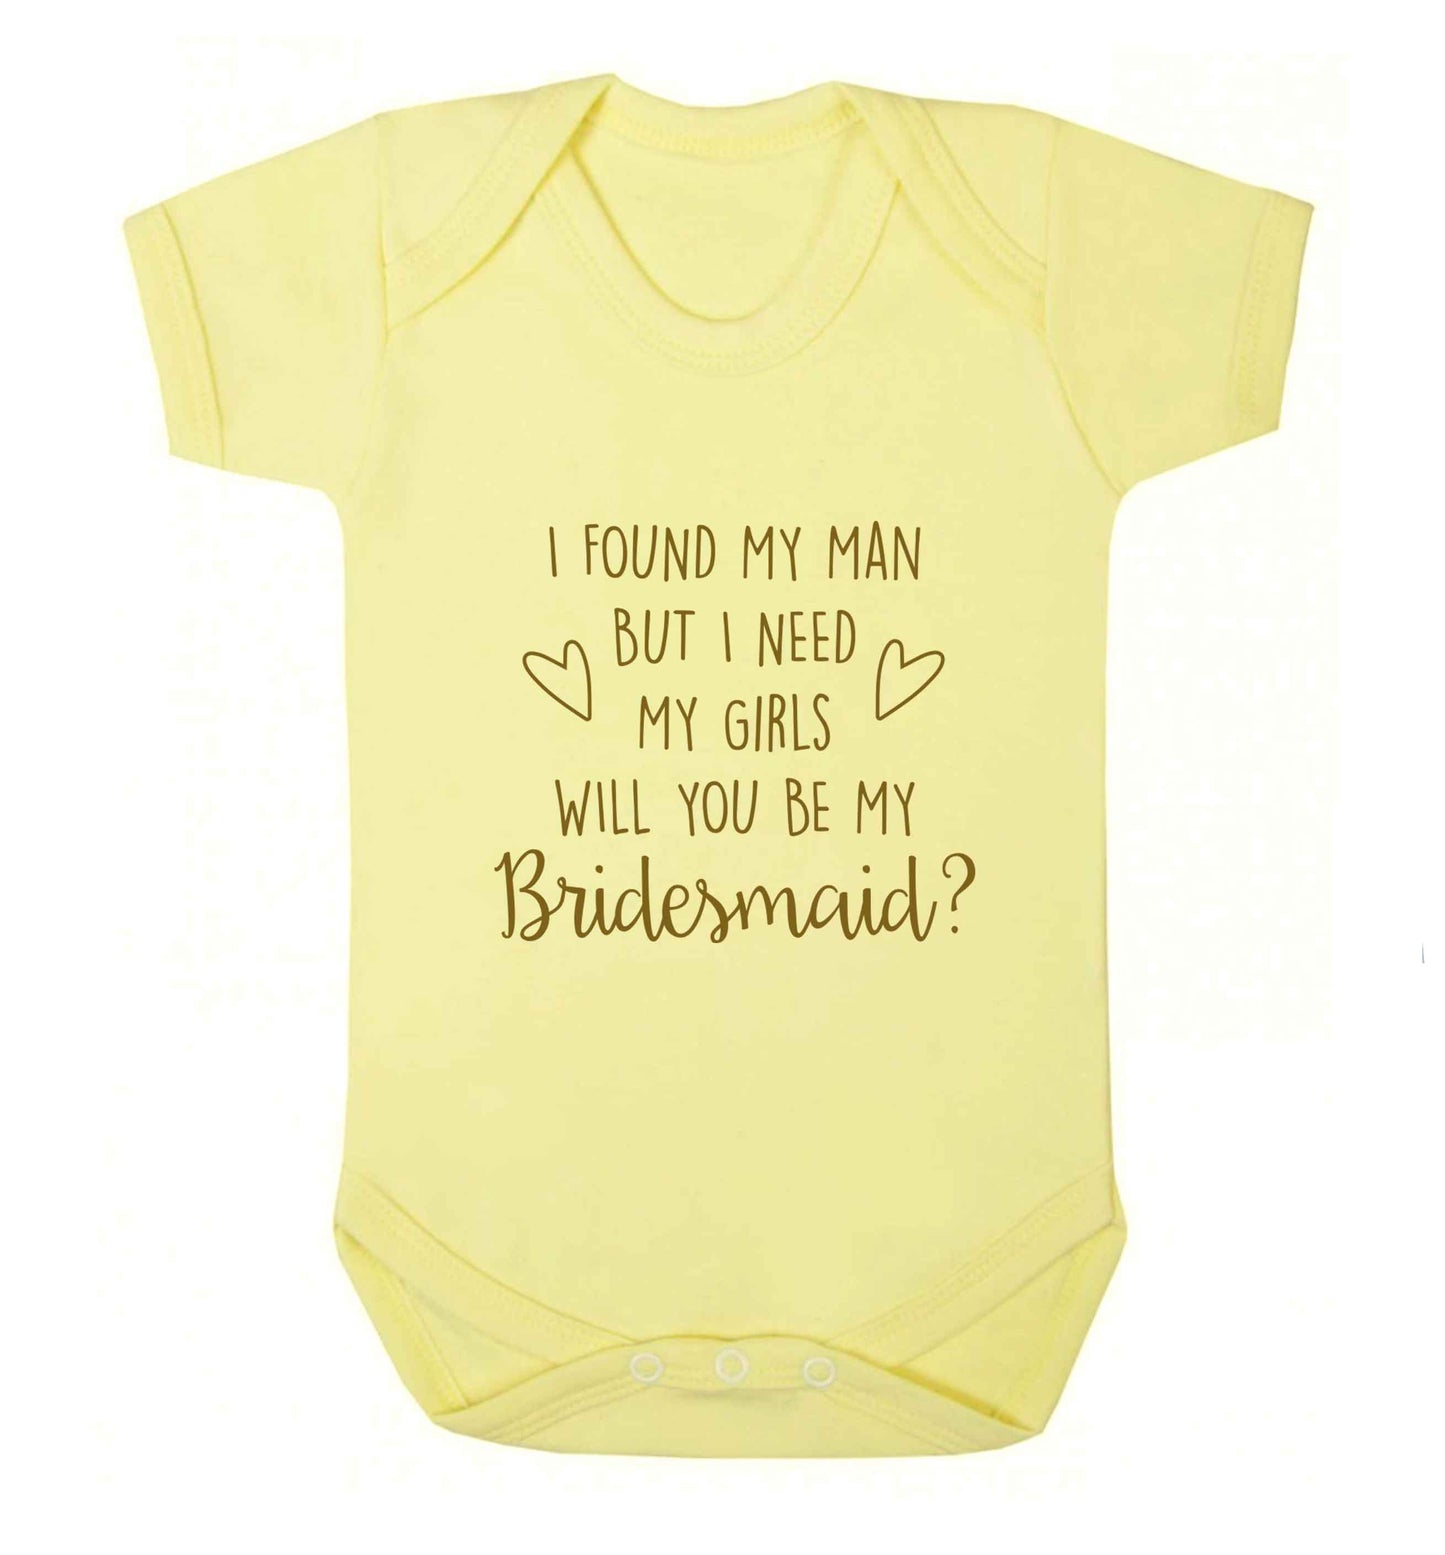 I found my man but I need my girls will you be my bridesmaid? baby vest pale yellow 18-24 months